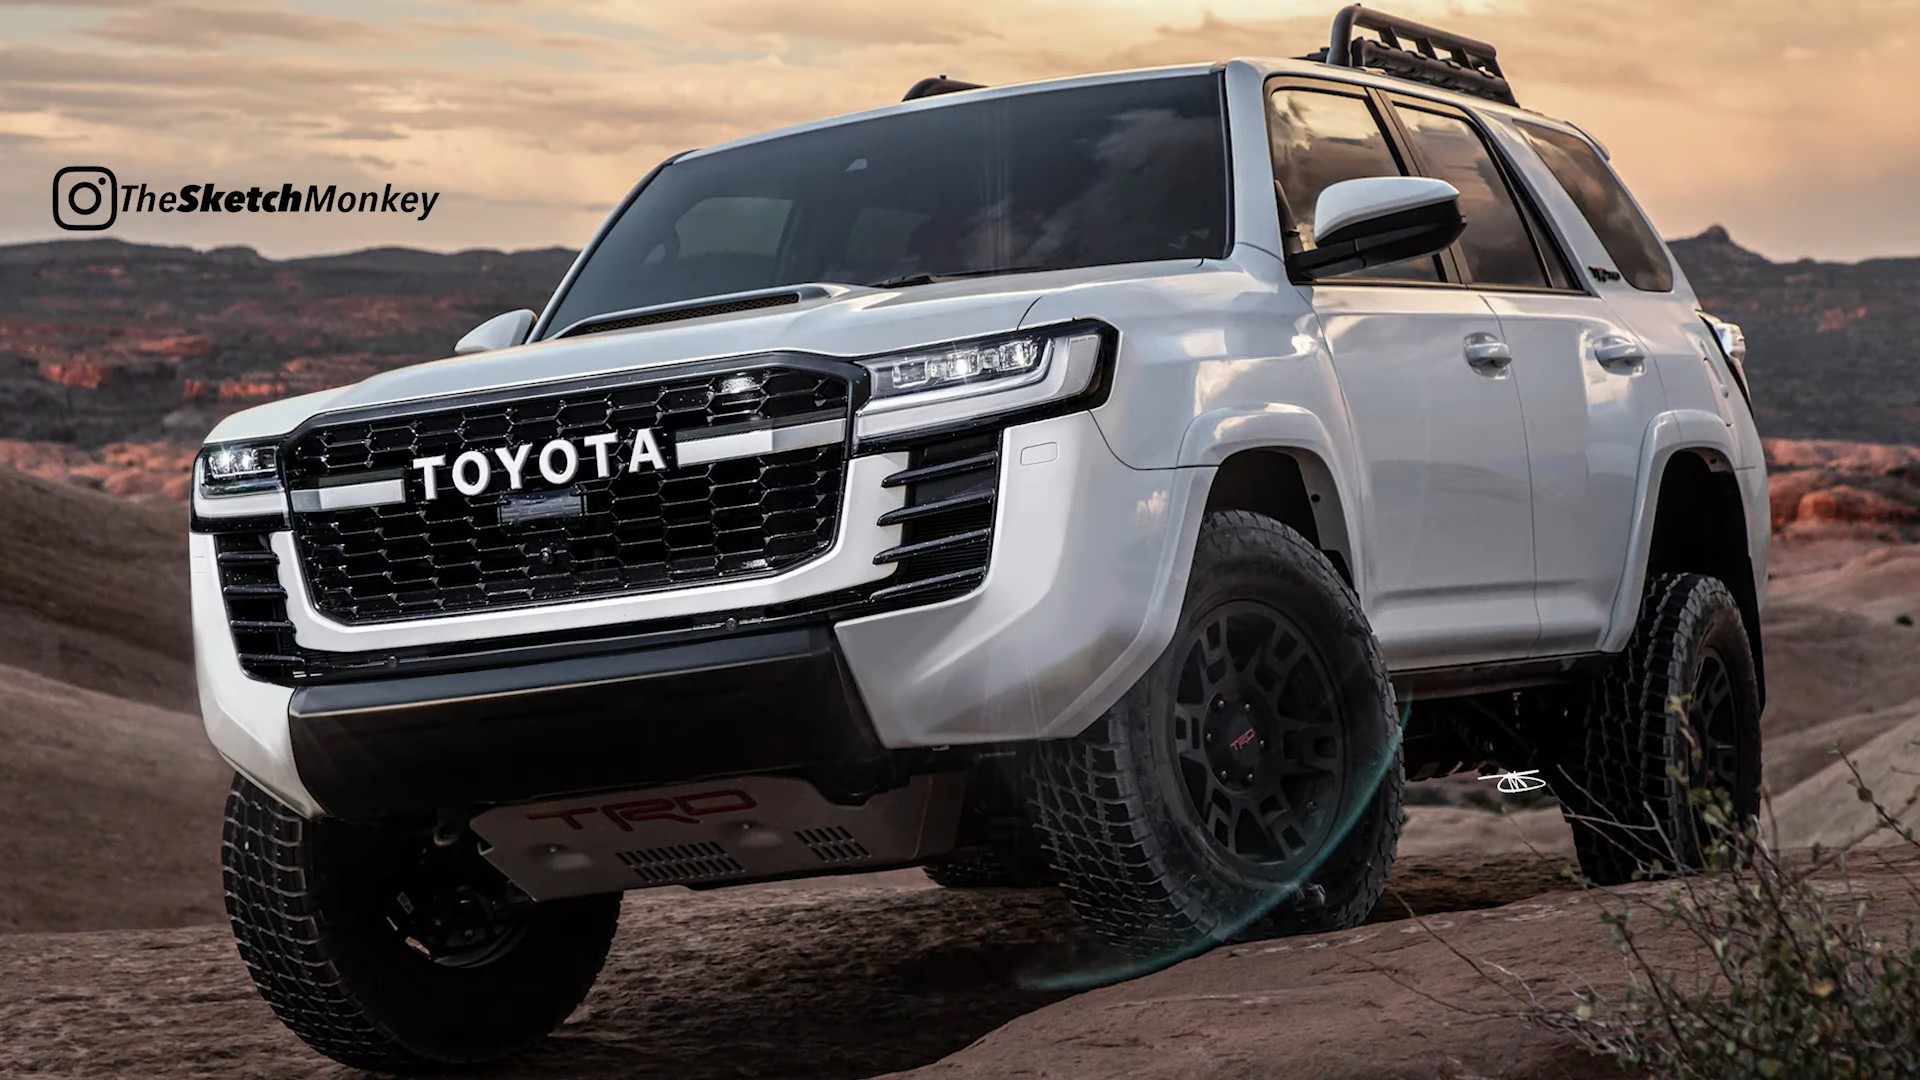 Sixth Gen Toyota 4runner Comes To Life Steals J300 Land Cruisers